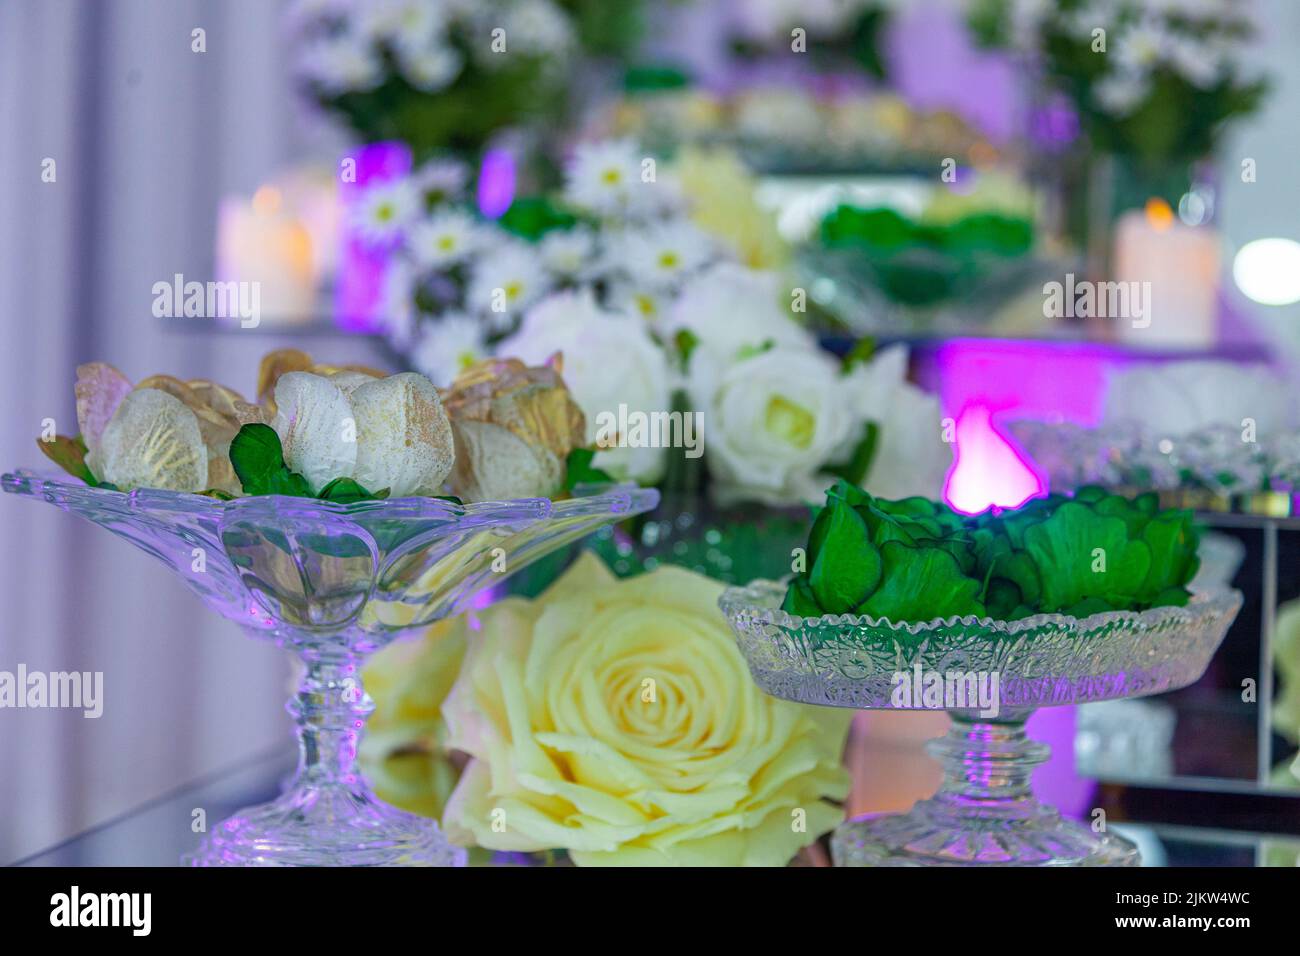 A close-up of flower decoration at the wedding celebration Stock Photo